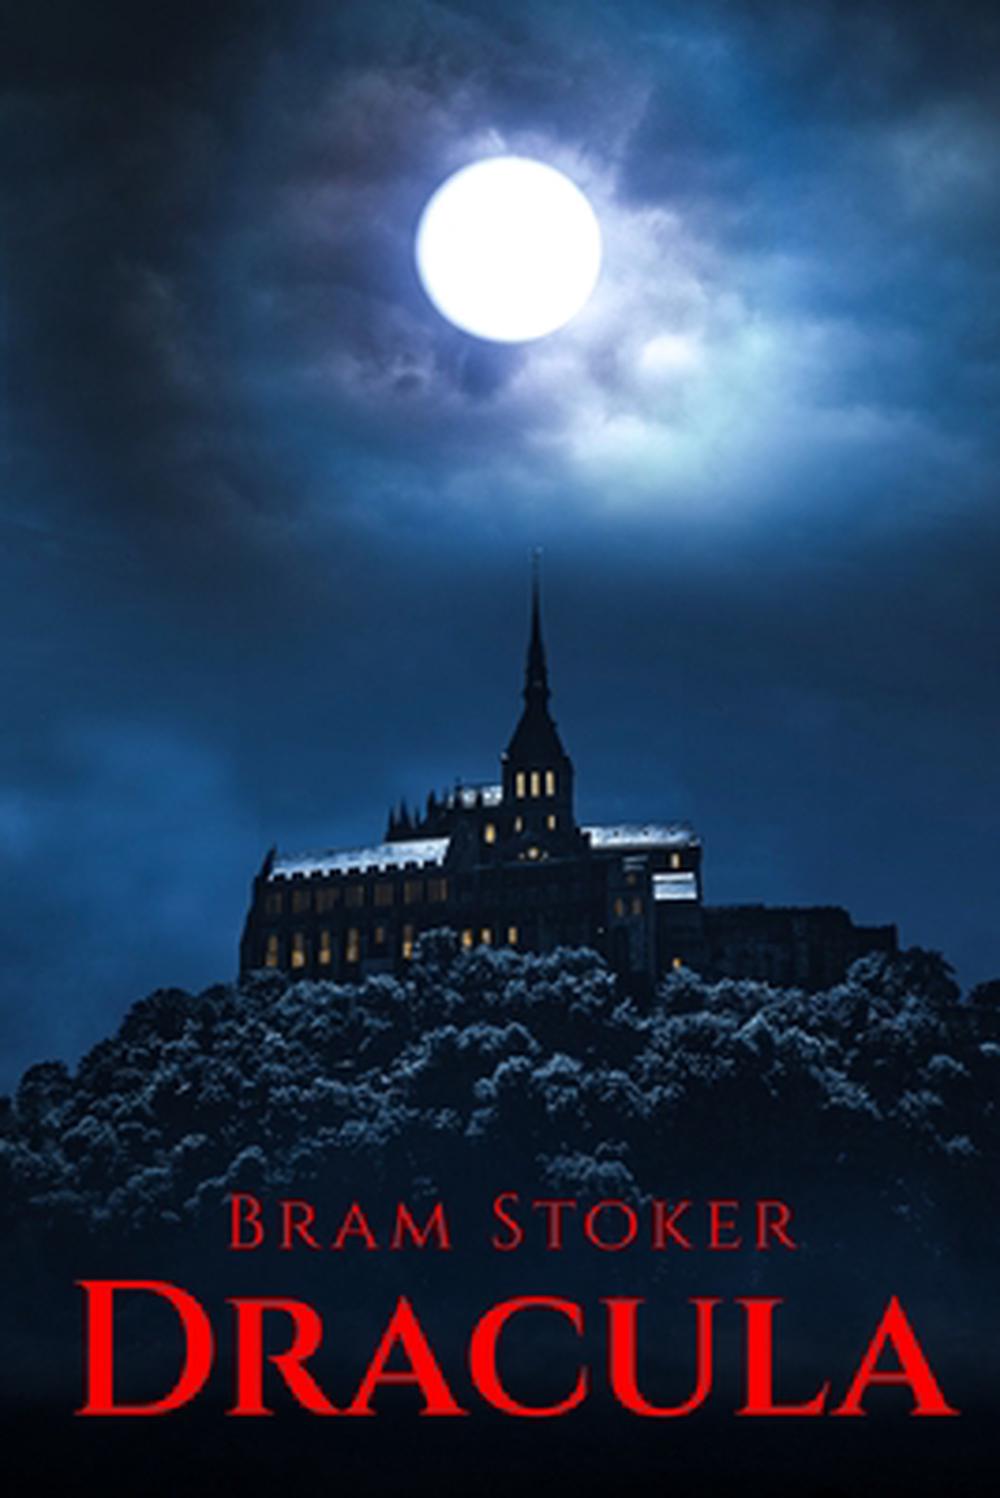 book review of dracula by bram stoker